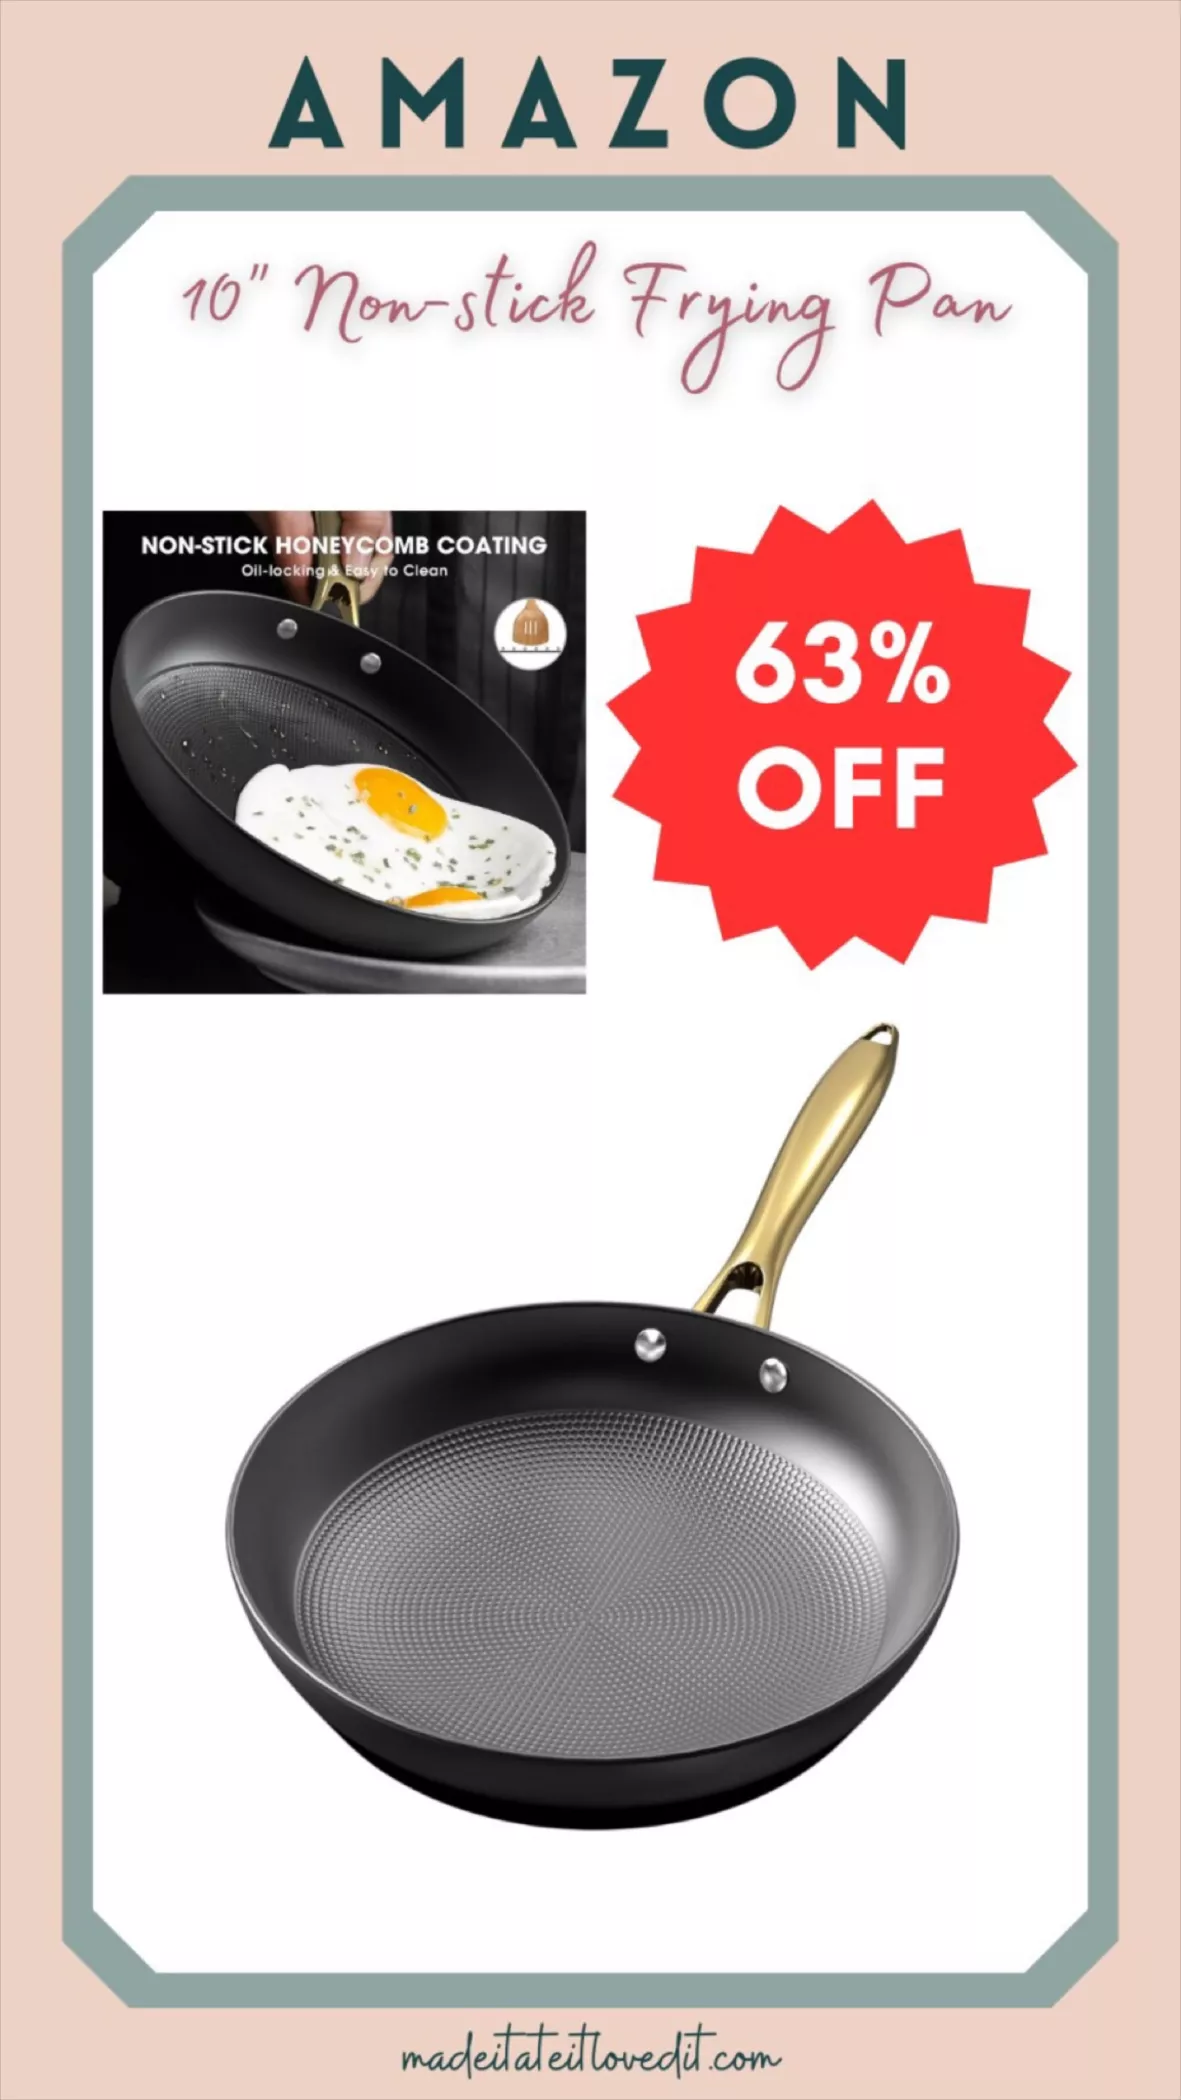 imarku Non stick Frying Pans, Long … curated on LTK